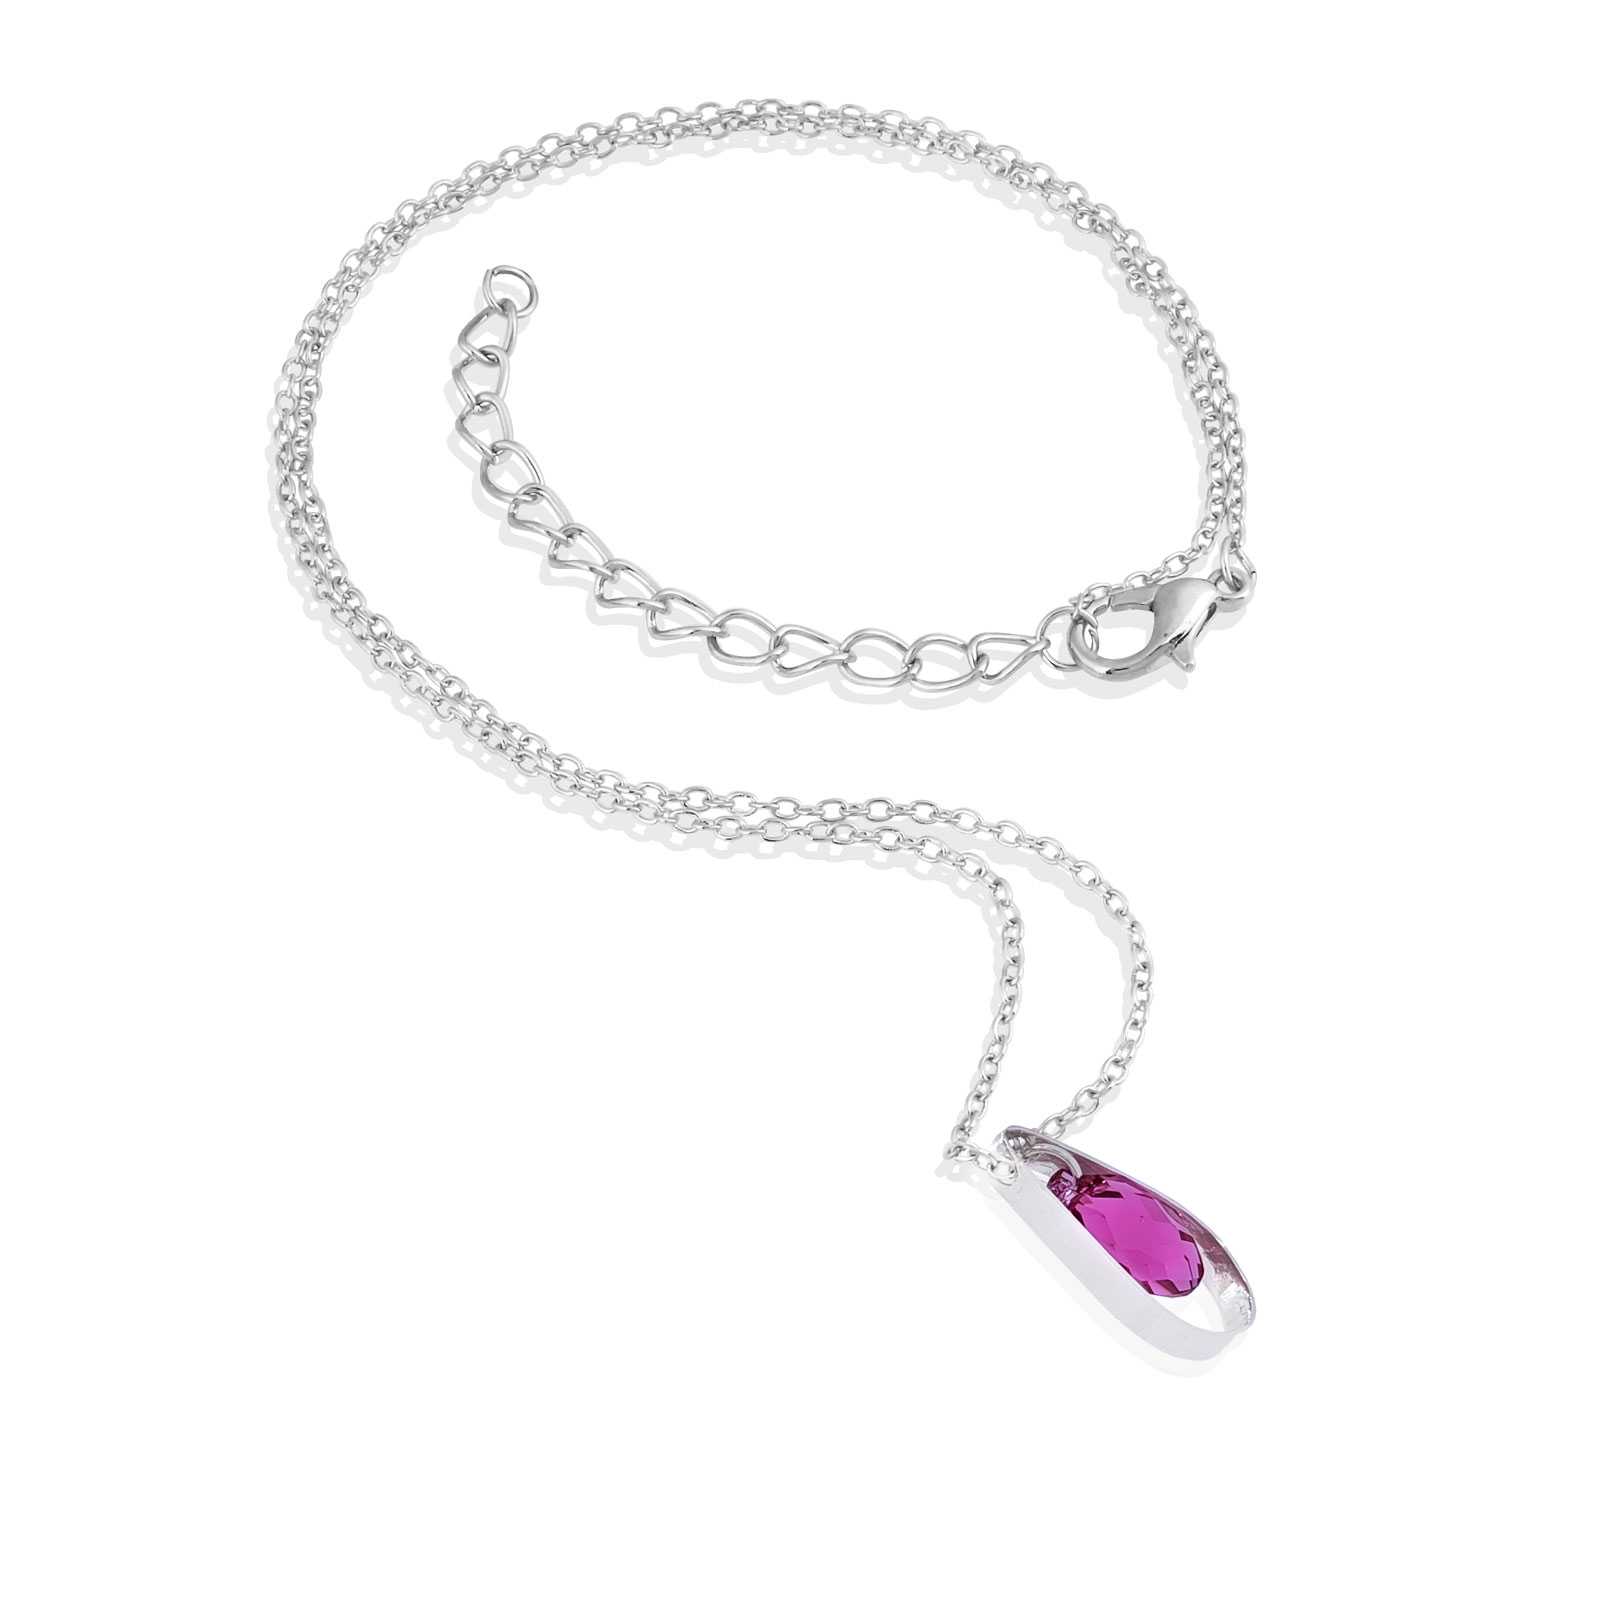 Teardrop crystal & silver necklace| Mali's Canadian handmade Jewelry 4 equal payments with Klarna
------------------------------